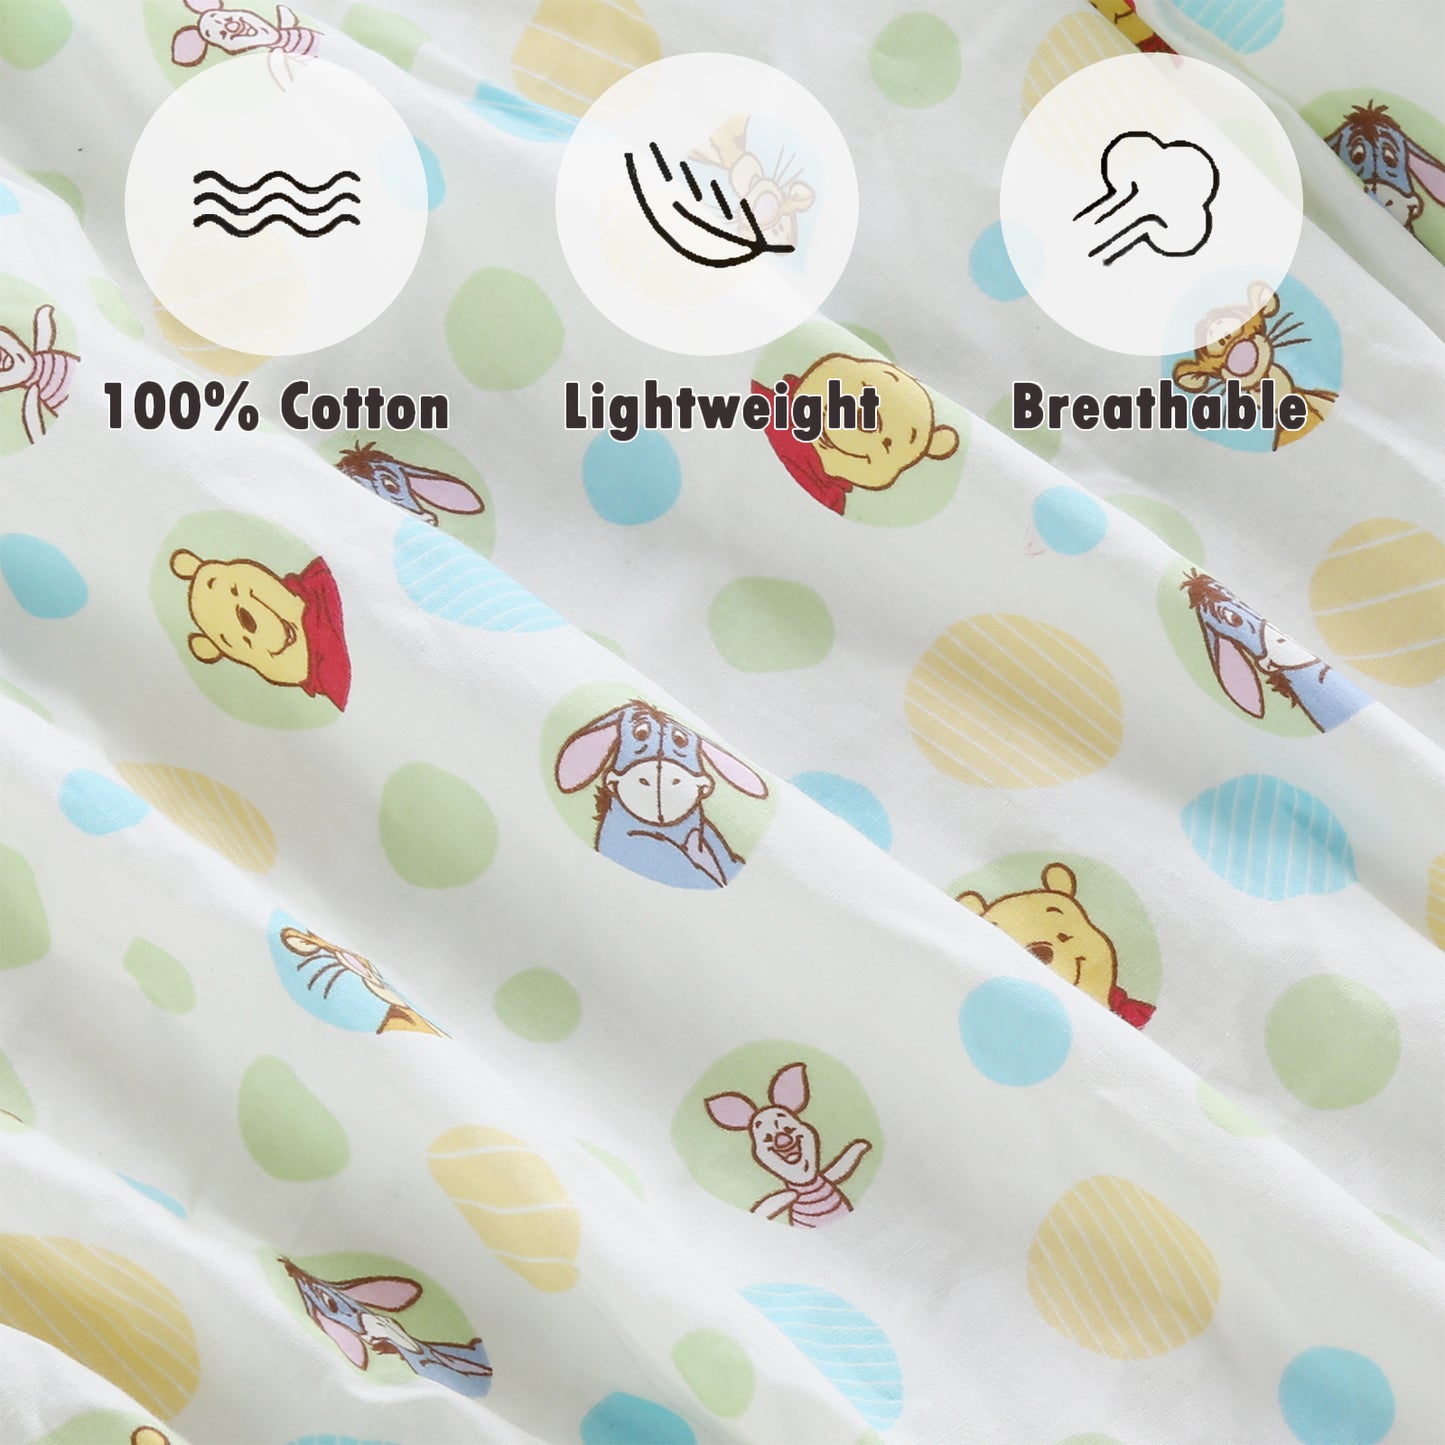 3 Piece Crib/Toddler Cotton Fitted Sheets Colorful Blue Yellow Green Polka Dot Farm Animals, Pooh & Friends